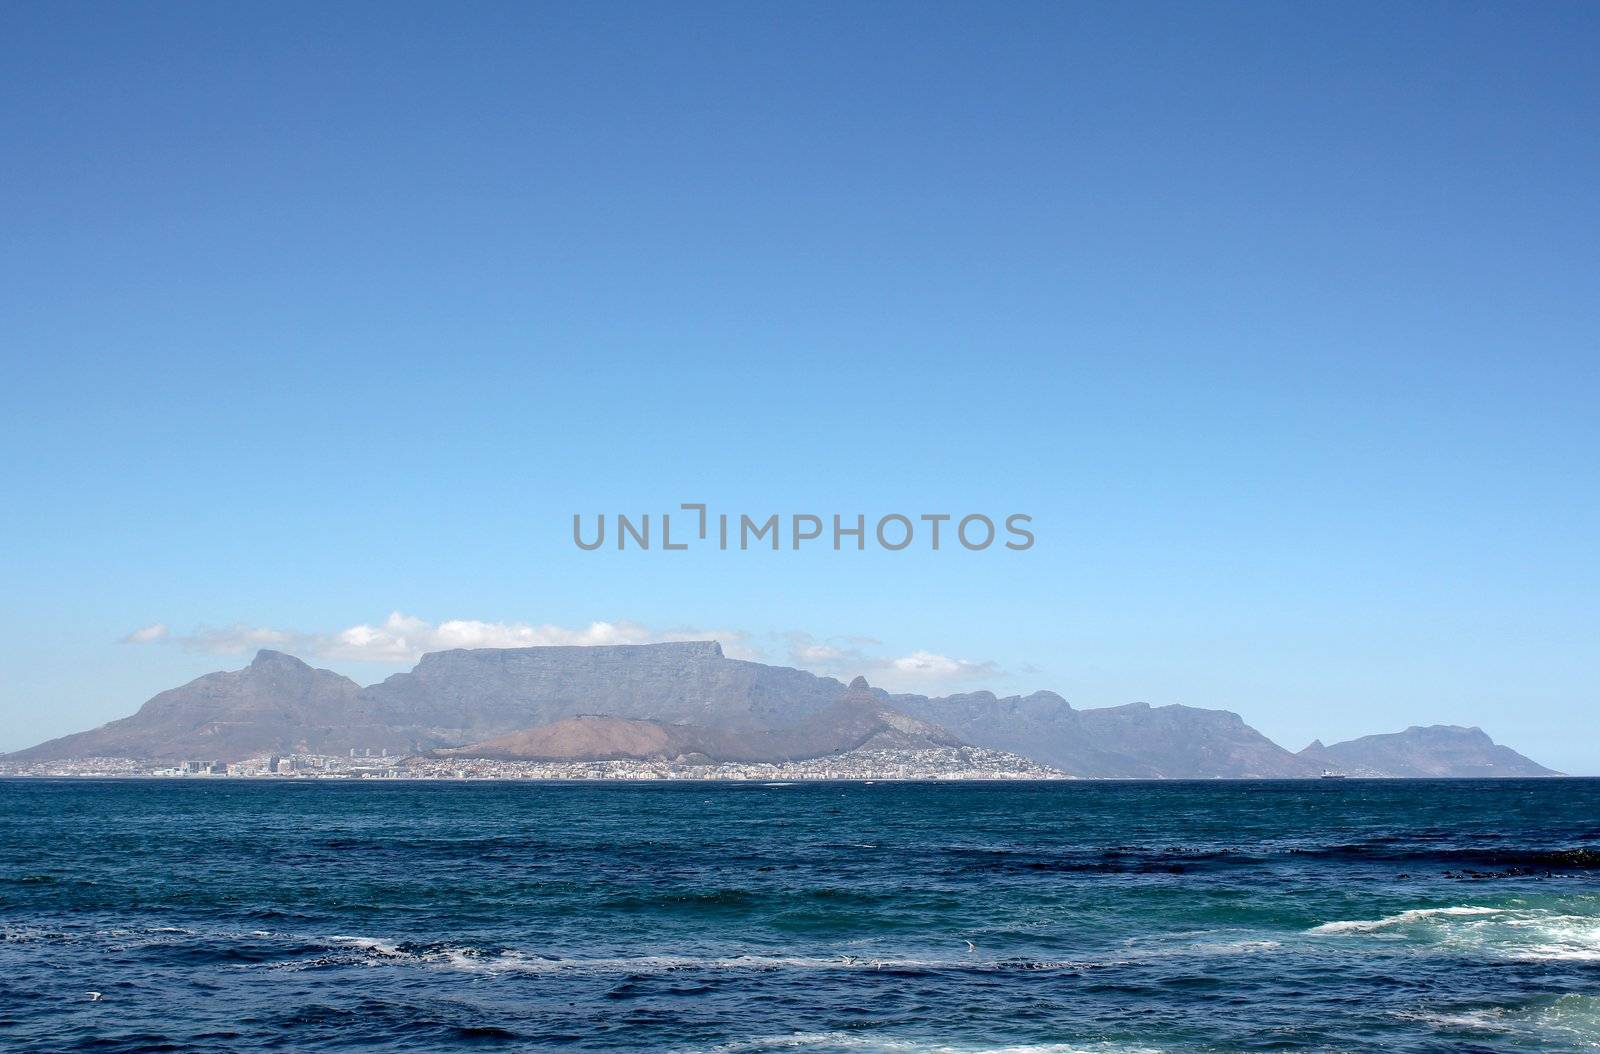 View of Cape Town, South Africa from Robben Island